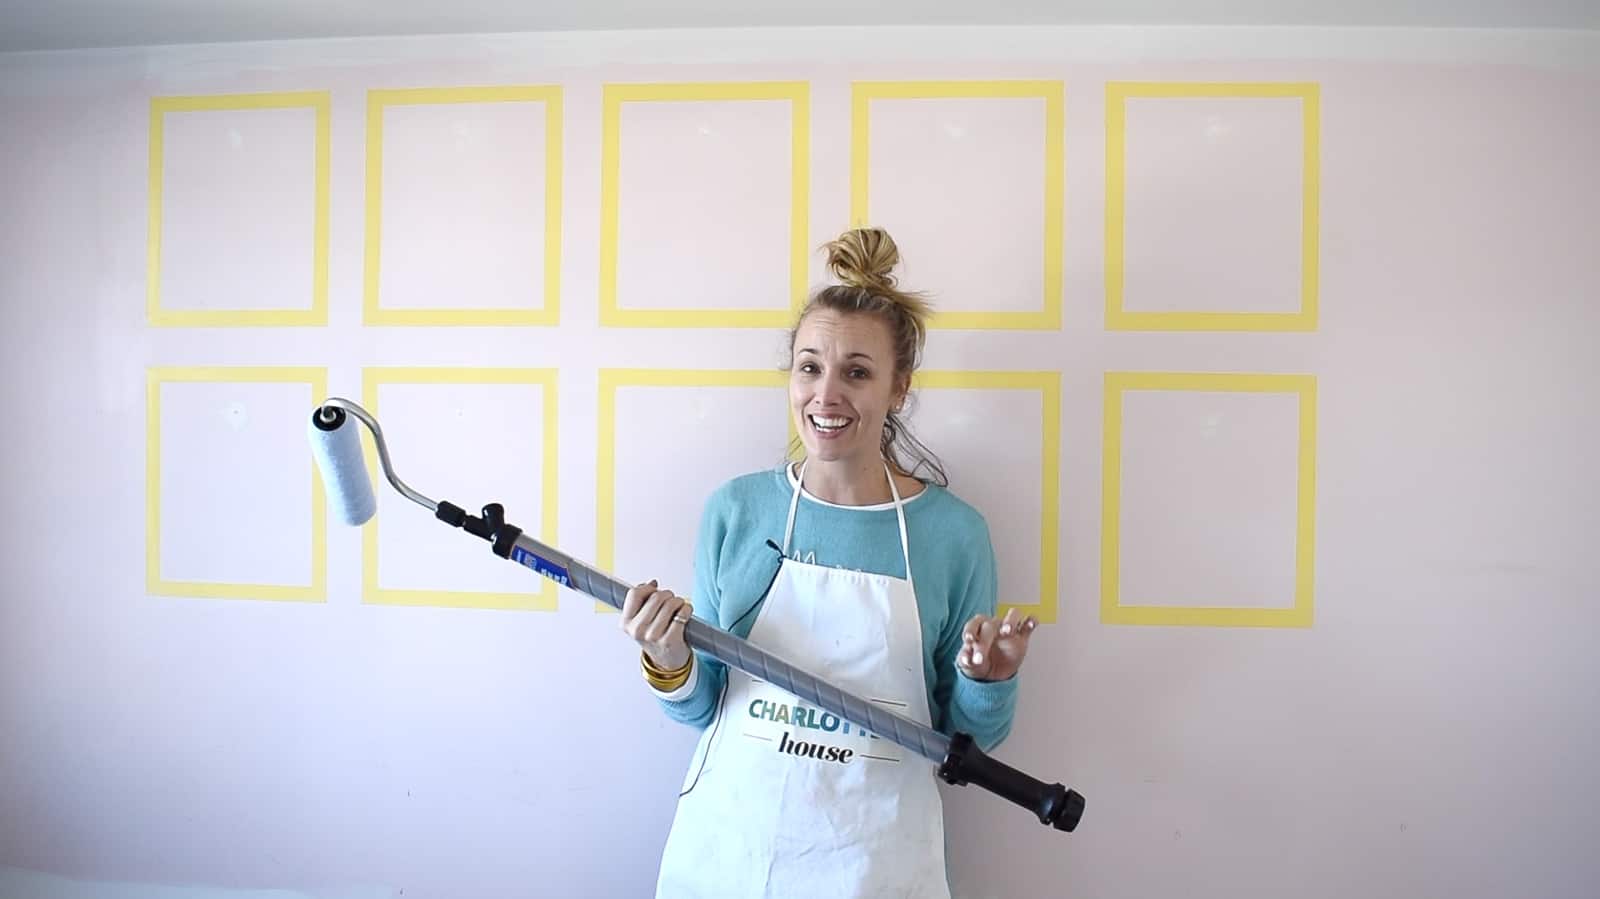 Painting a Room in One Afternoon with my Paint Stick - At Charlotte's House